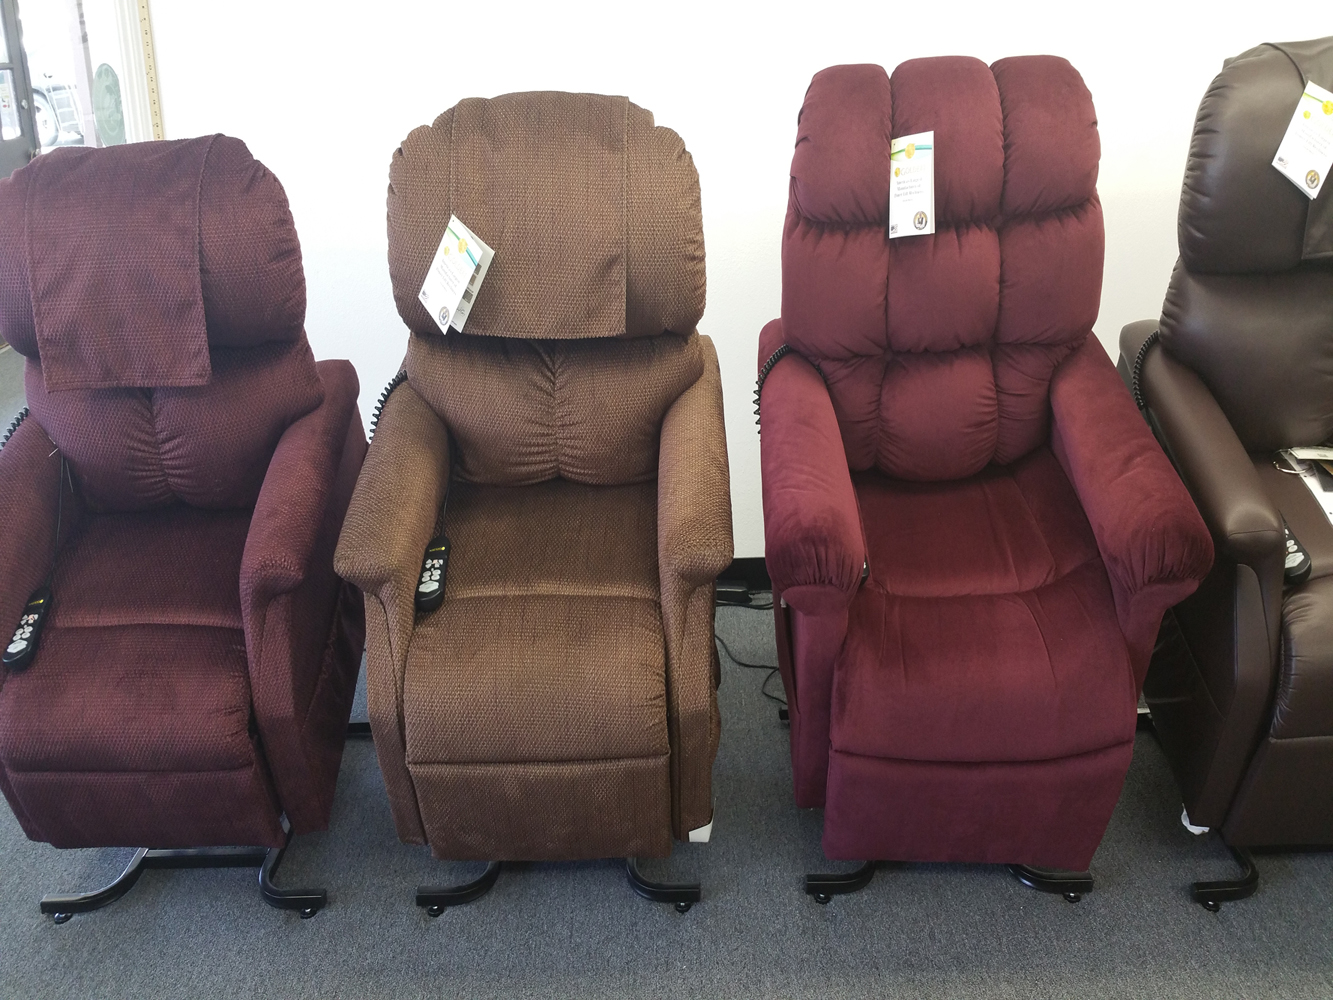 Rent Lift Chair seat reclining liftchair recliner are leather 2-motor infinite position zero gravity pride golden chairlifts